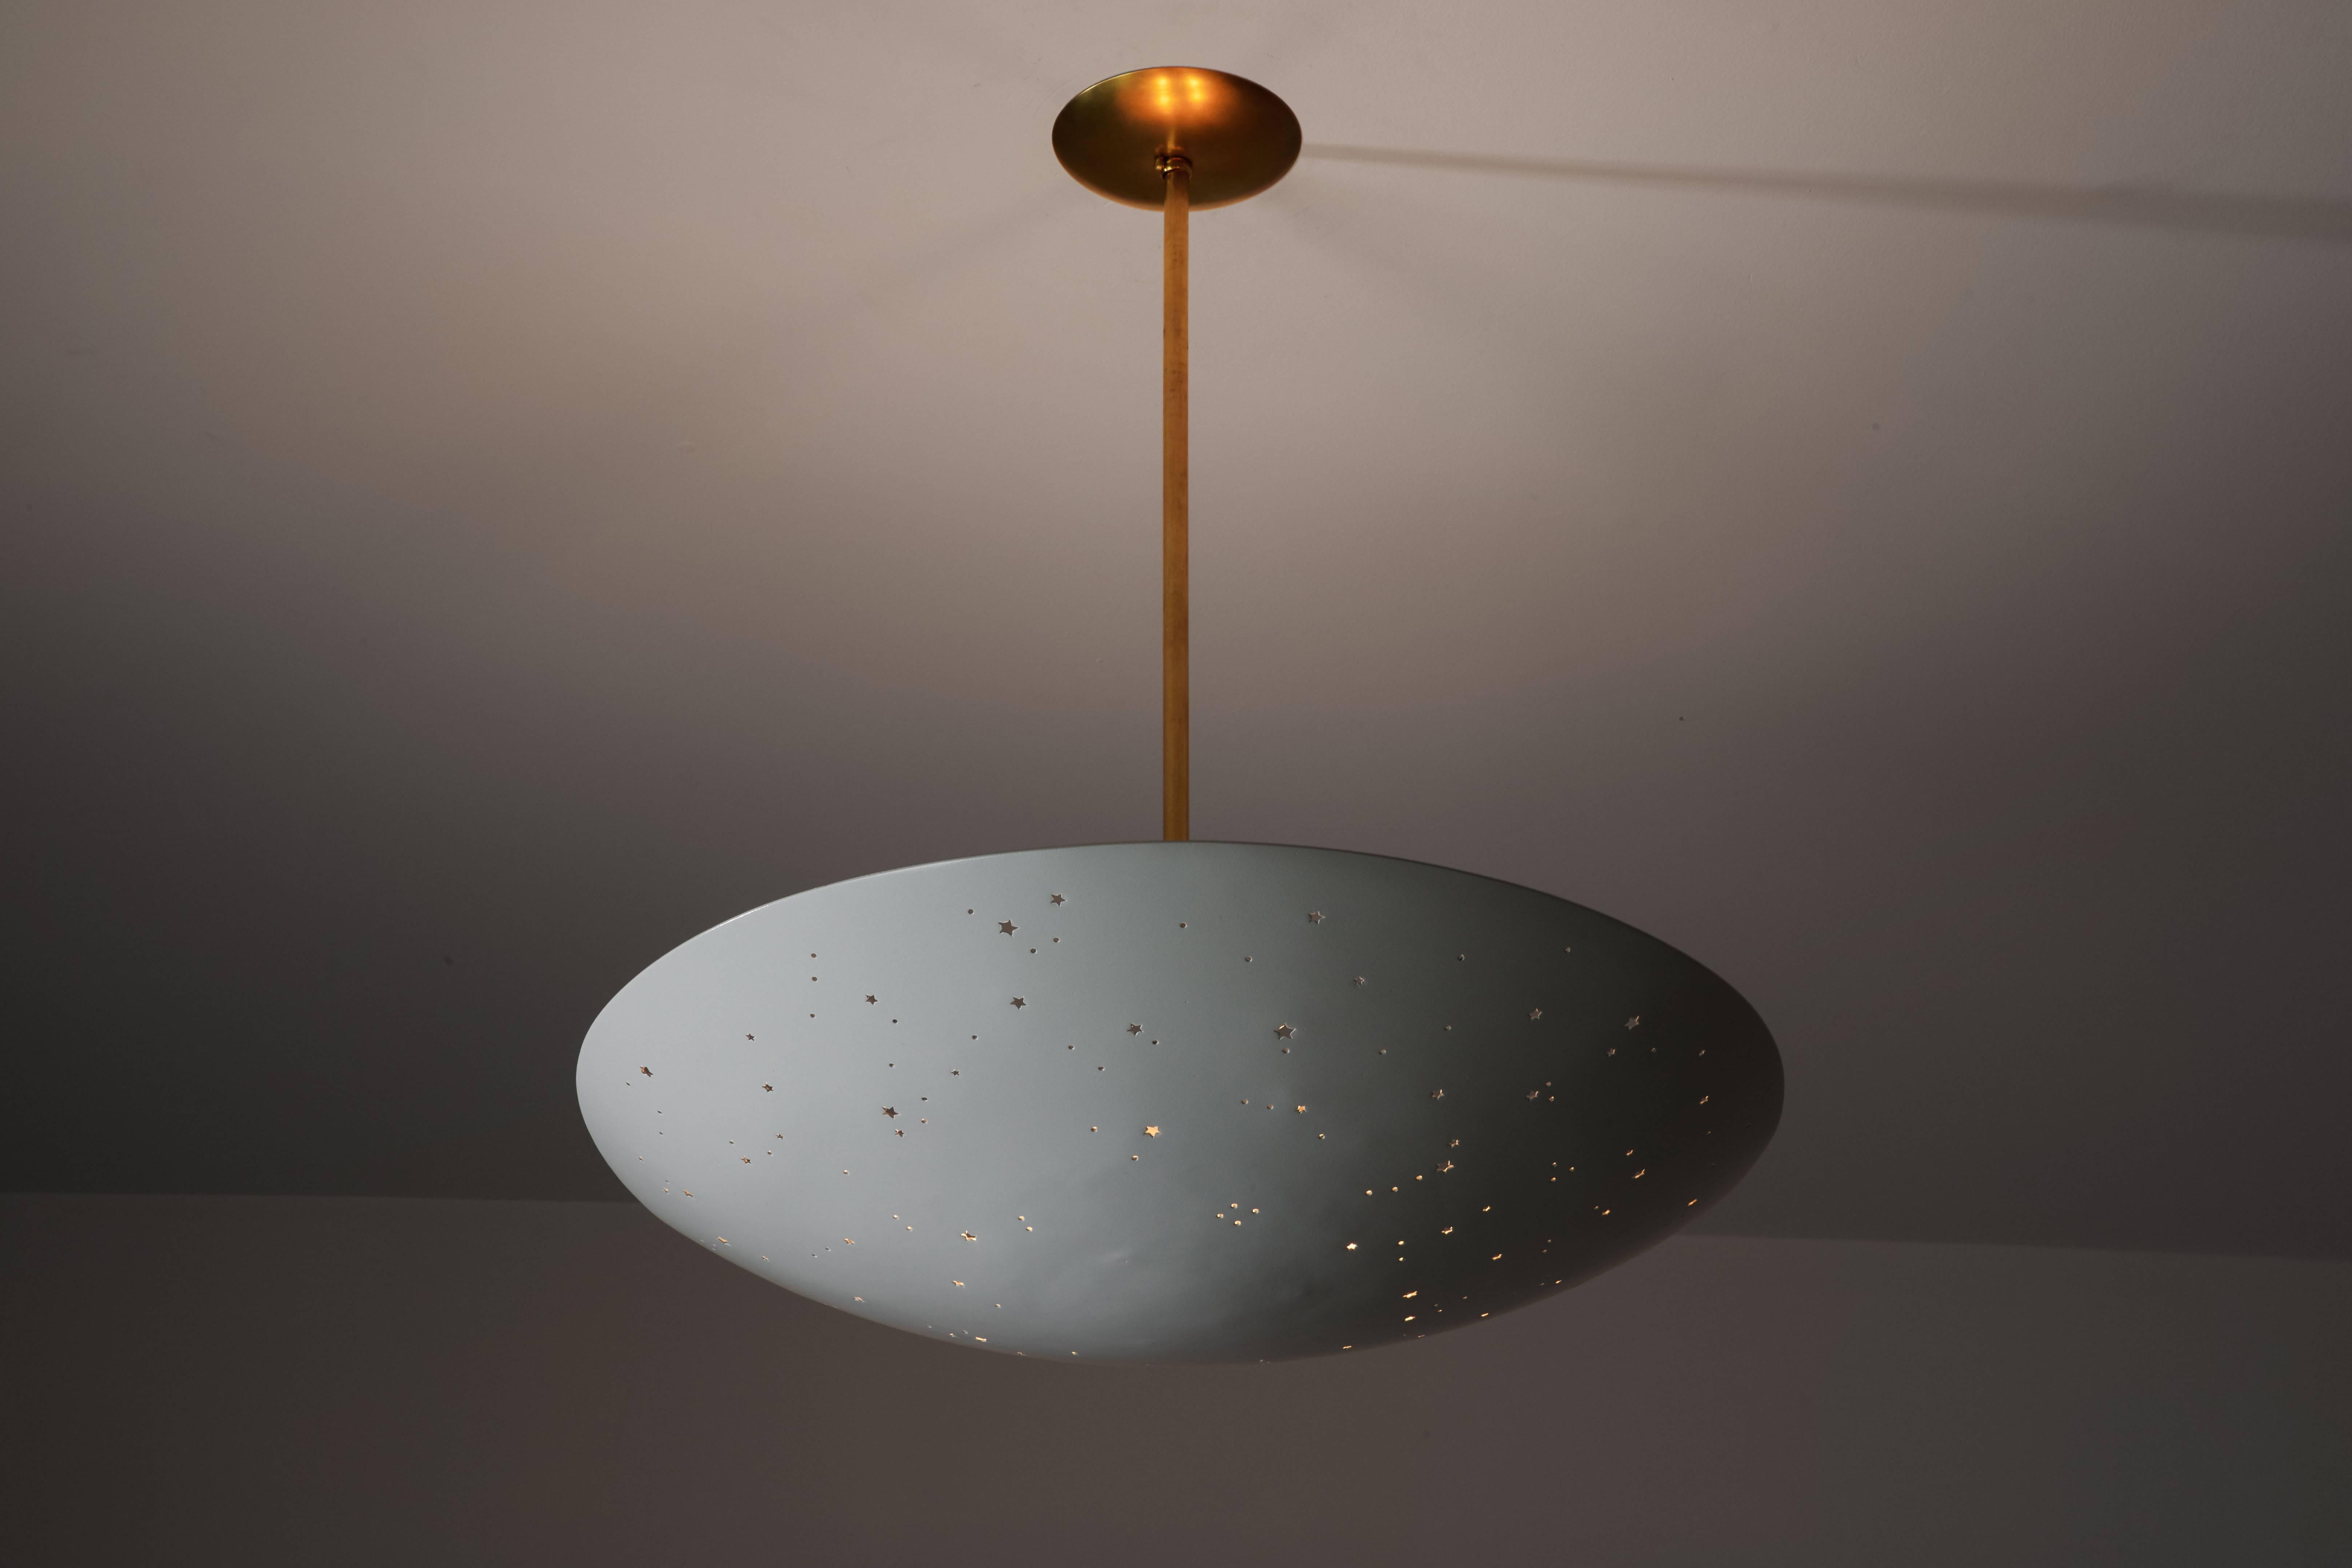 Pendant light manufactured in Italy, circa 1950s. Restored, powder coated metal fixture with small star-shaped perforations. Brass hardware with custom brass backplate. Rewired for US junction boxes. Takes four E26 75w maximum bulbs. Overall drop